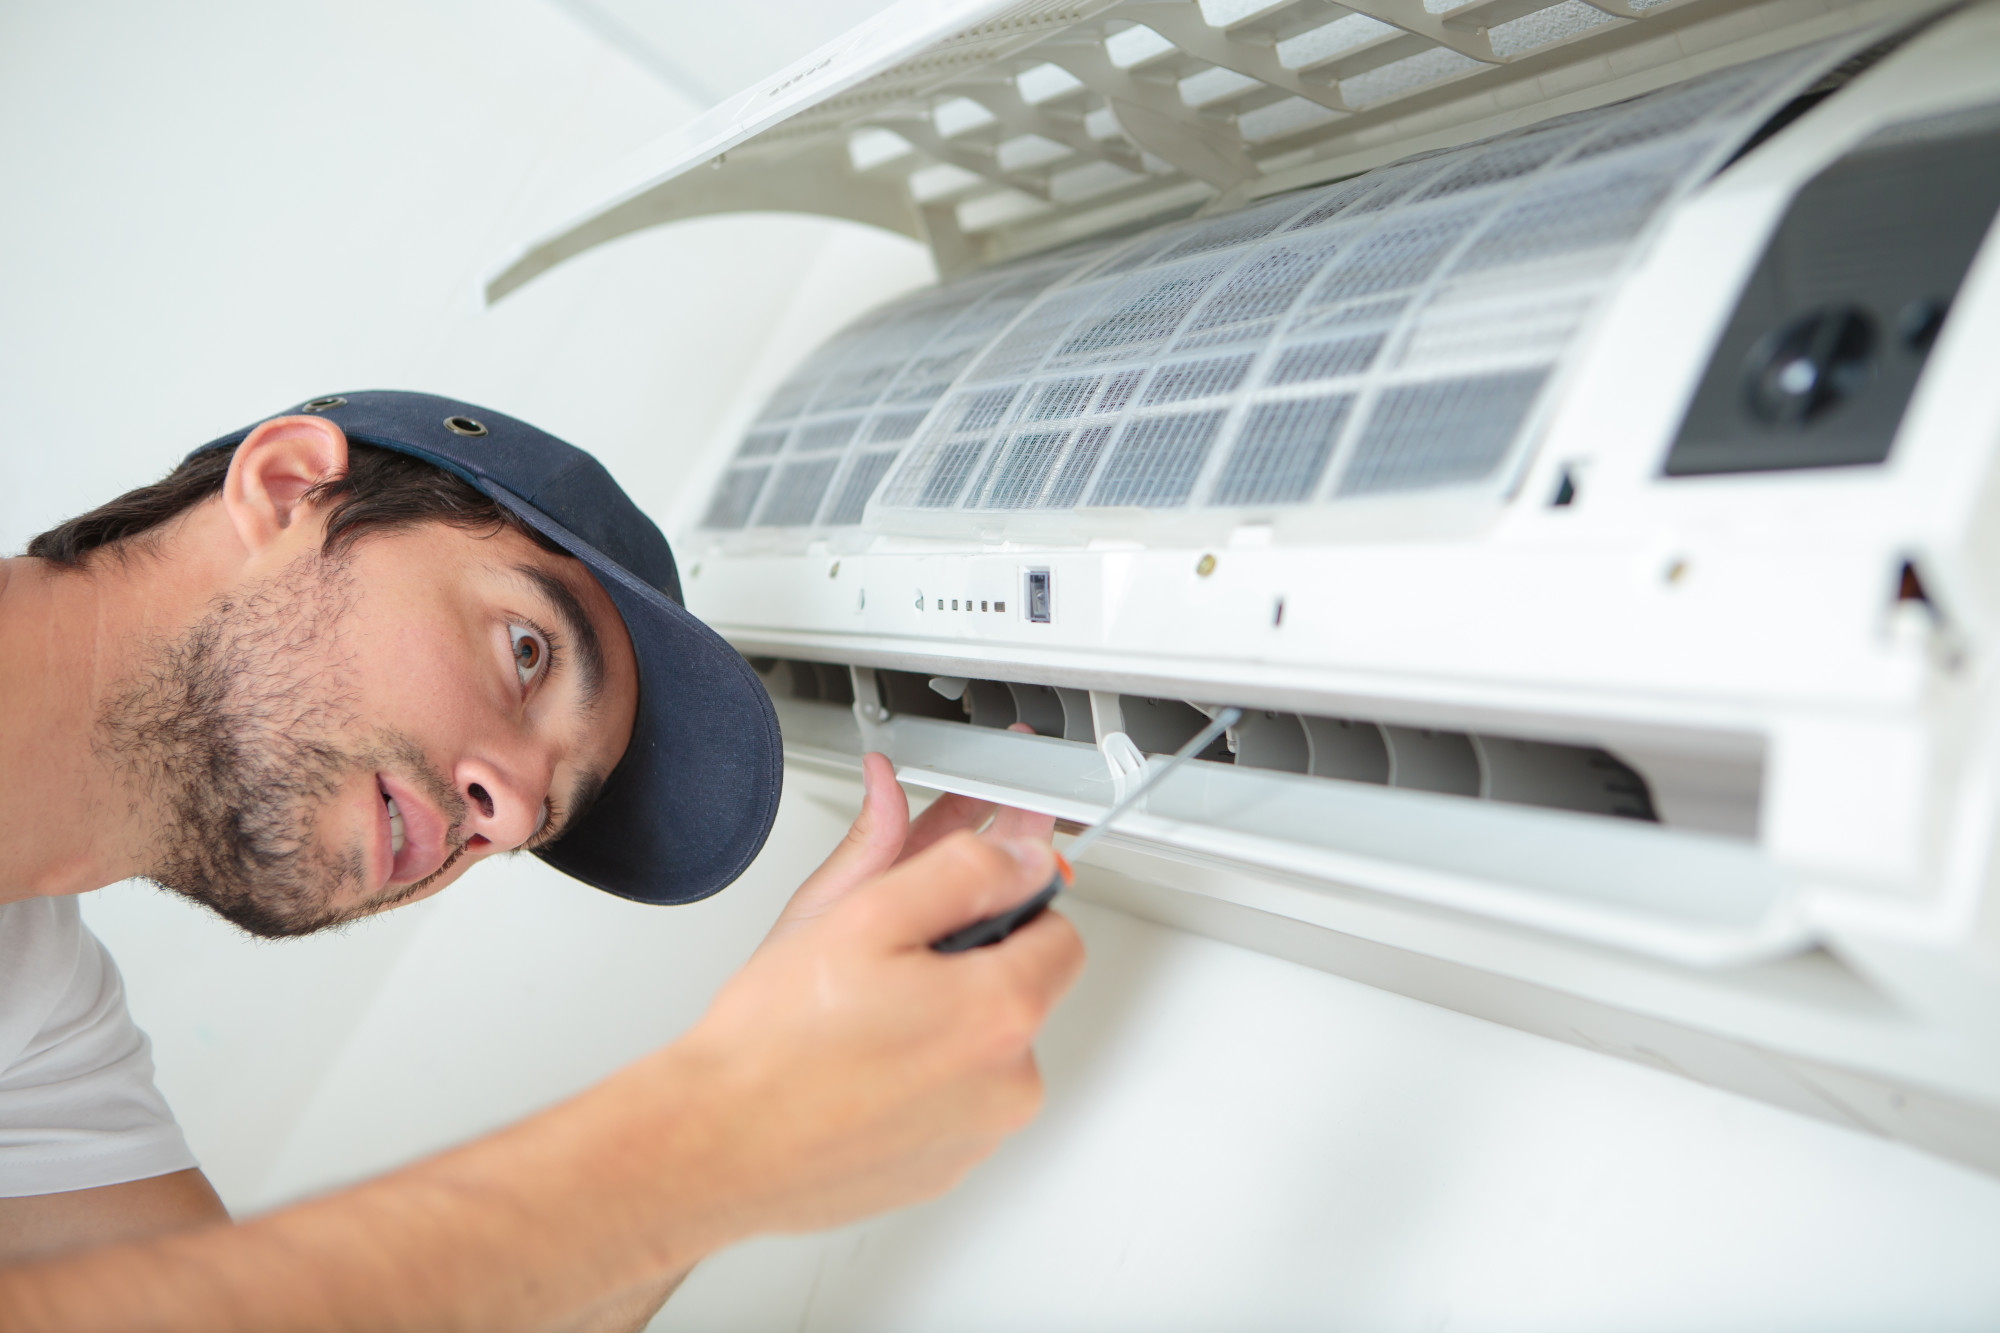 5 Money Saving Tips on How to Make an Air Conditioner More Efficient